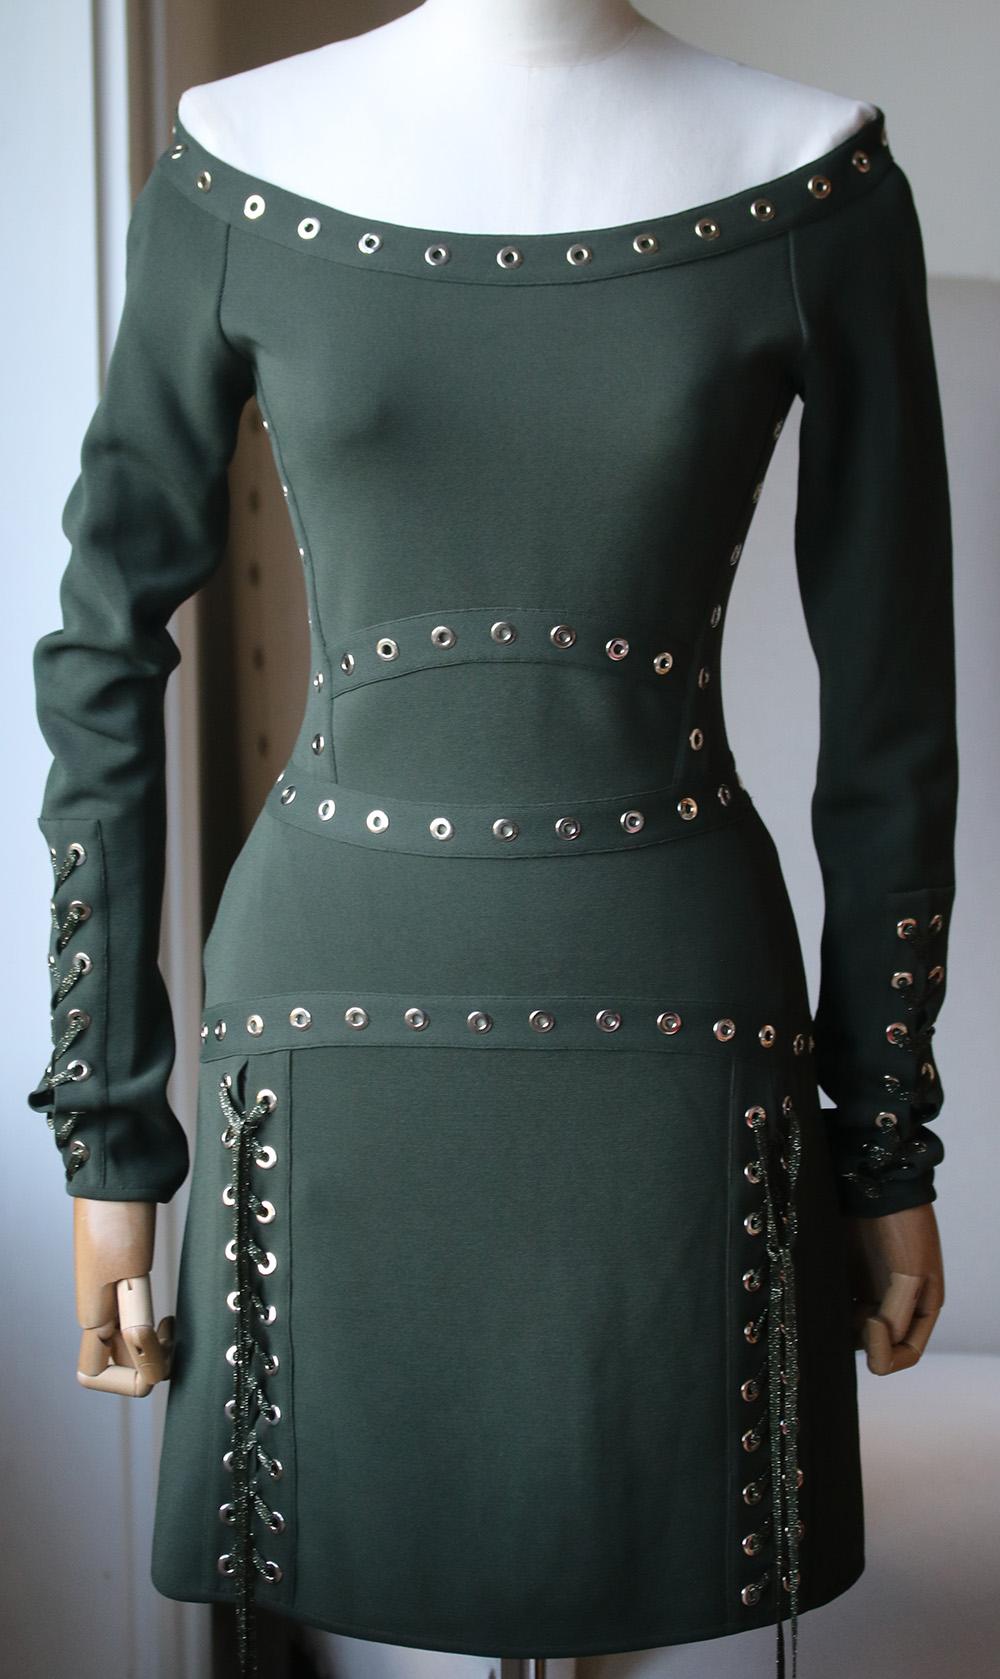 Elie Saab's Army-Green Mini Dress Is Sure To Be Spotted On The Coolest Party Girls - Natasha Poly And Kendall Jenner Are Already Huge Fans Of The Label. Cut From Sculpting Stretch-Knit To Hug Your Curves, It's Embellished With Silver Eyelets And